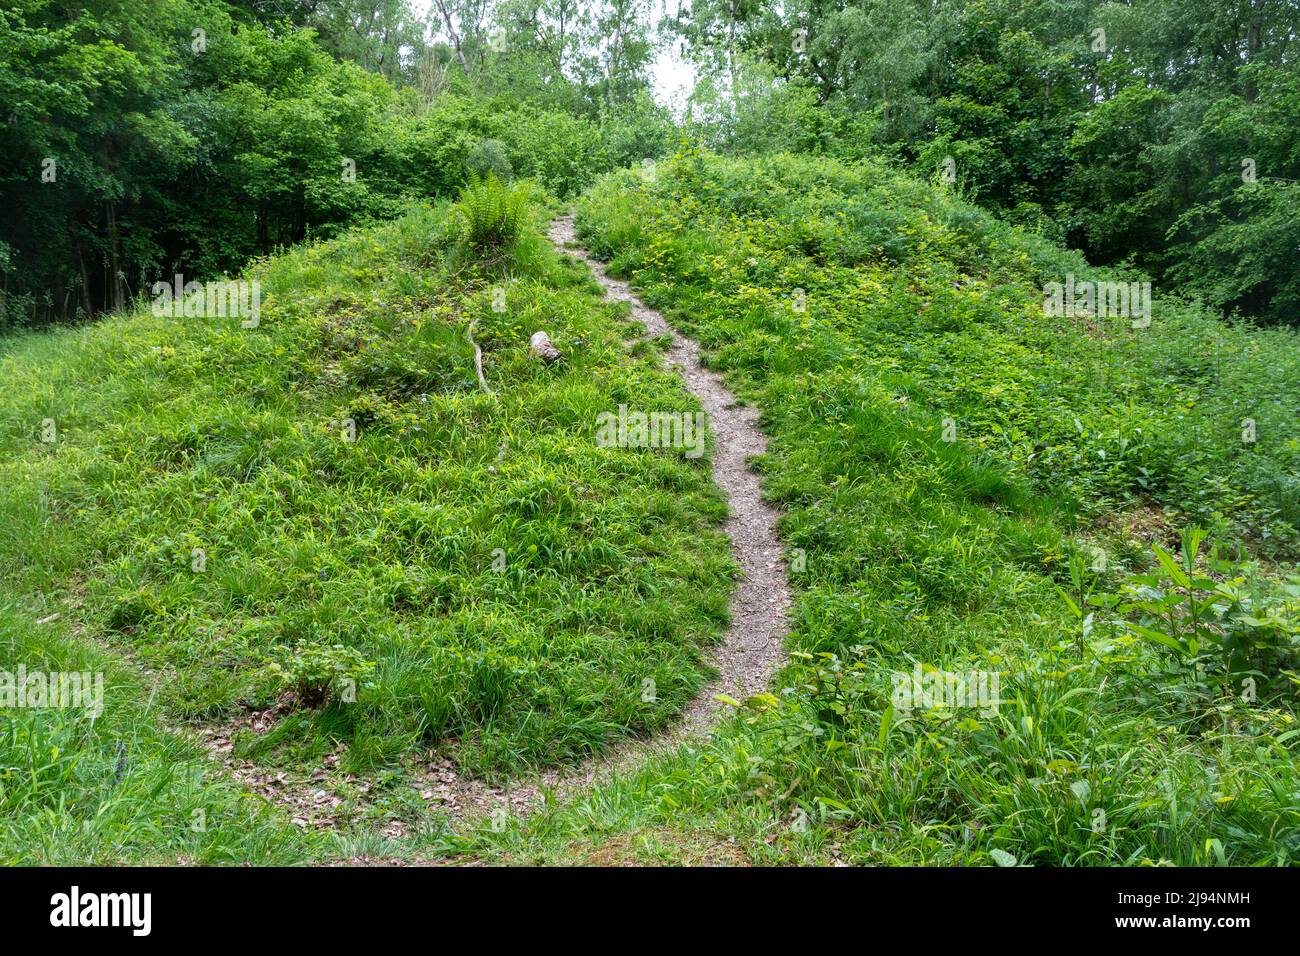 The motte of Hampstead Norreys Castle, an ancient monument in woodland in West Berkshire, England, UK Stock Photo